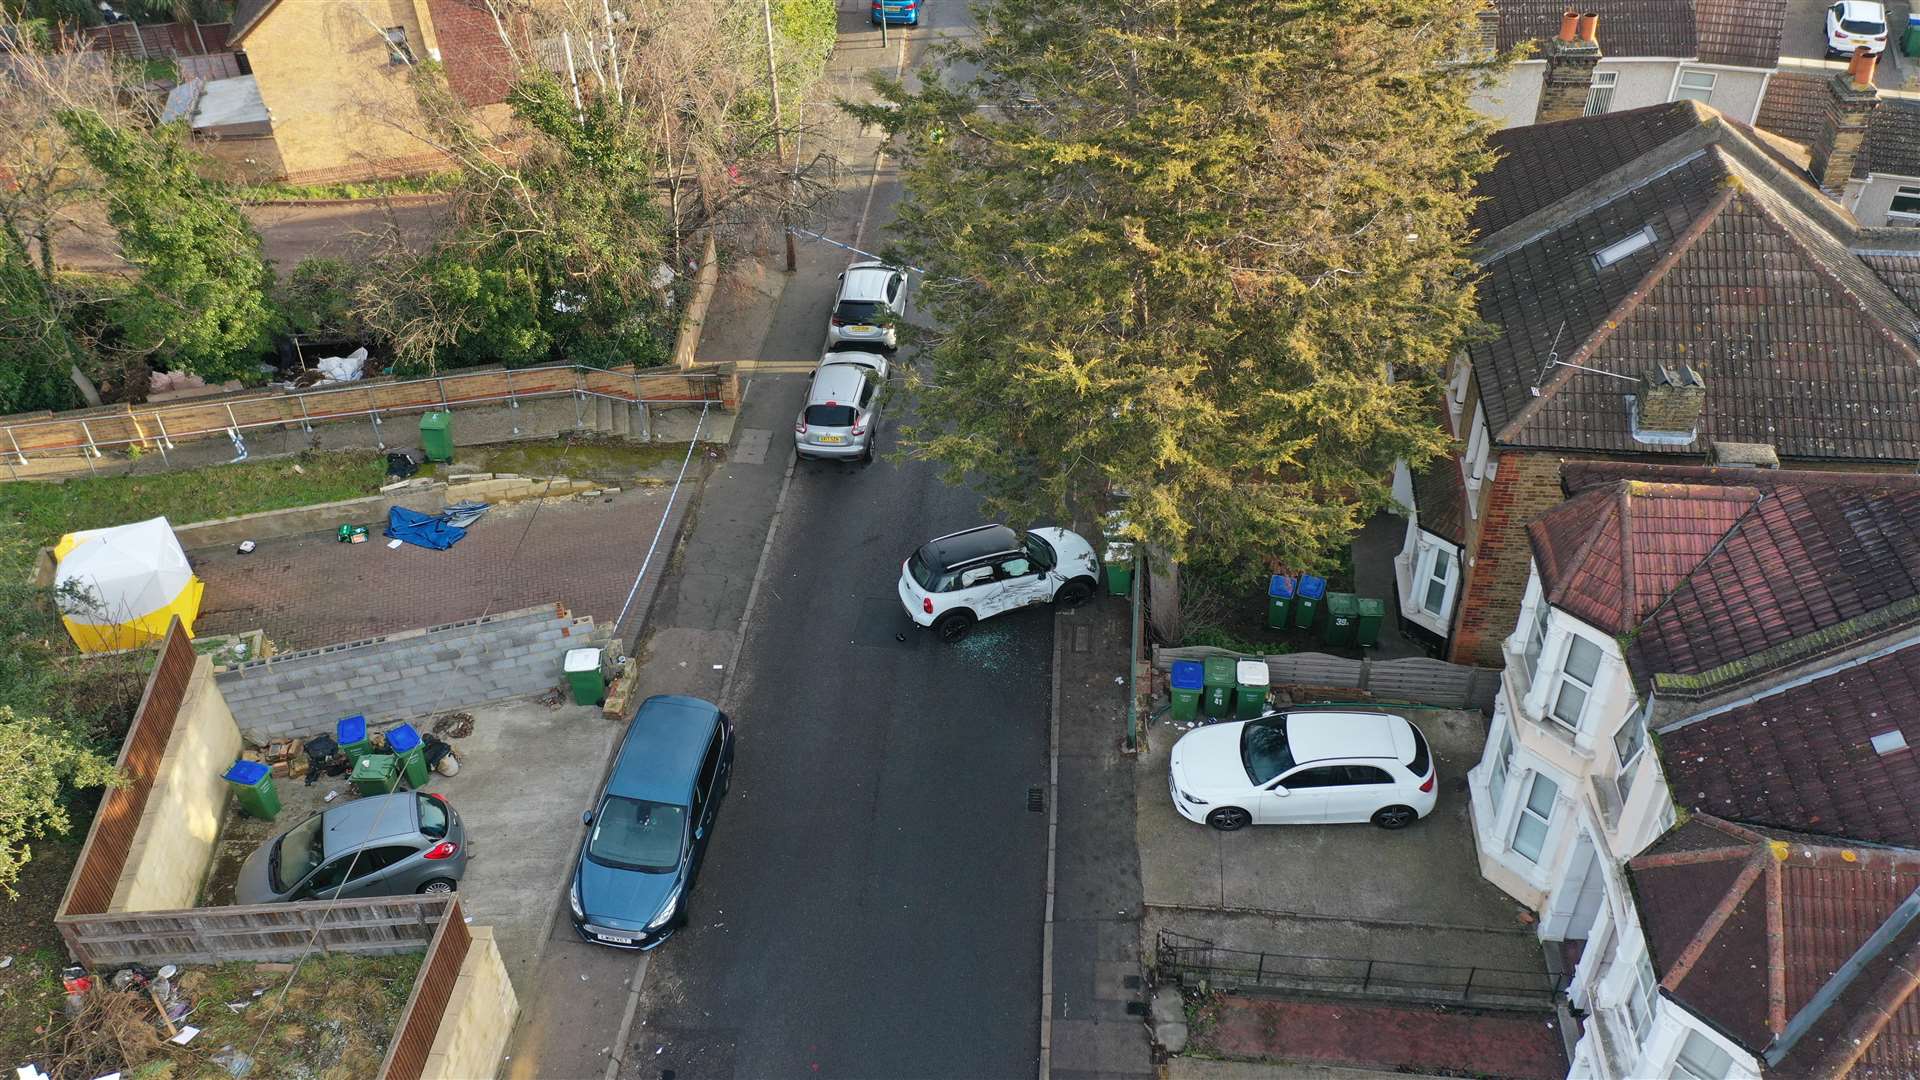 A man was found with gunshot wounds in Hillside, Erith Picture: UKNIP